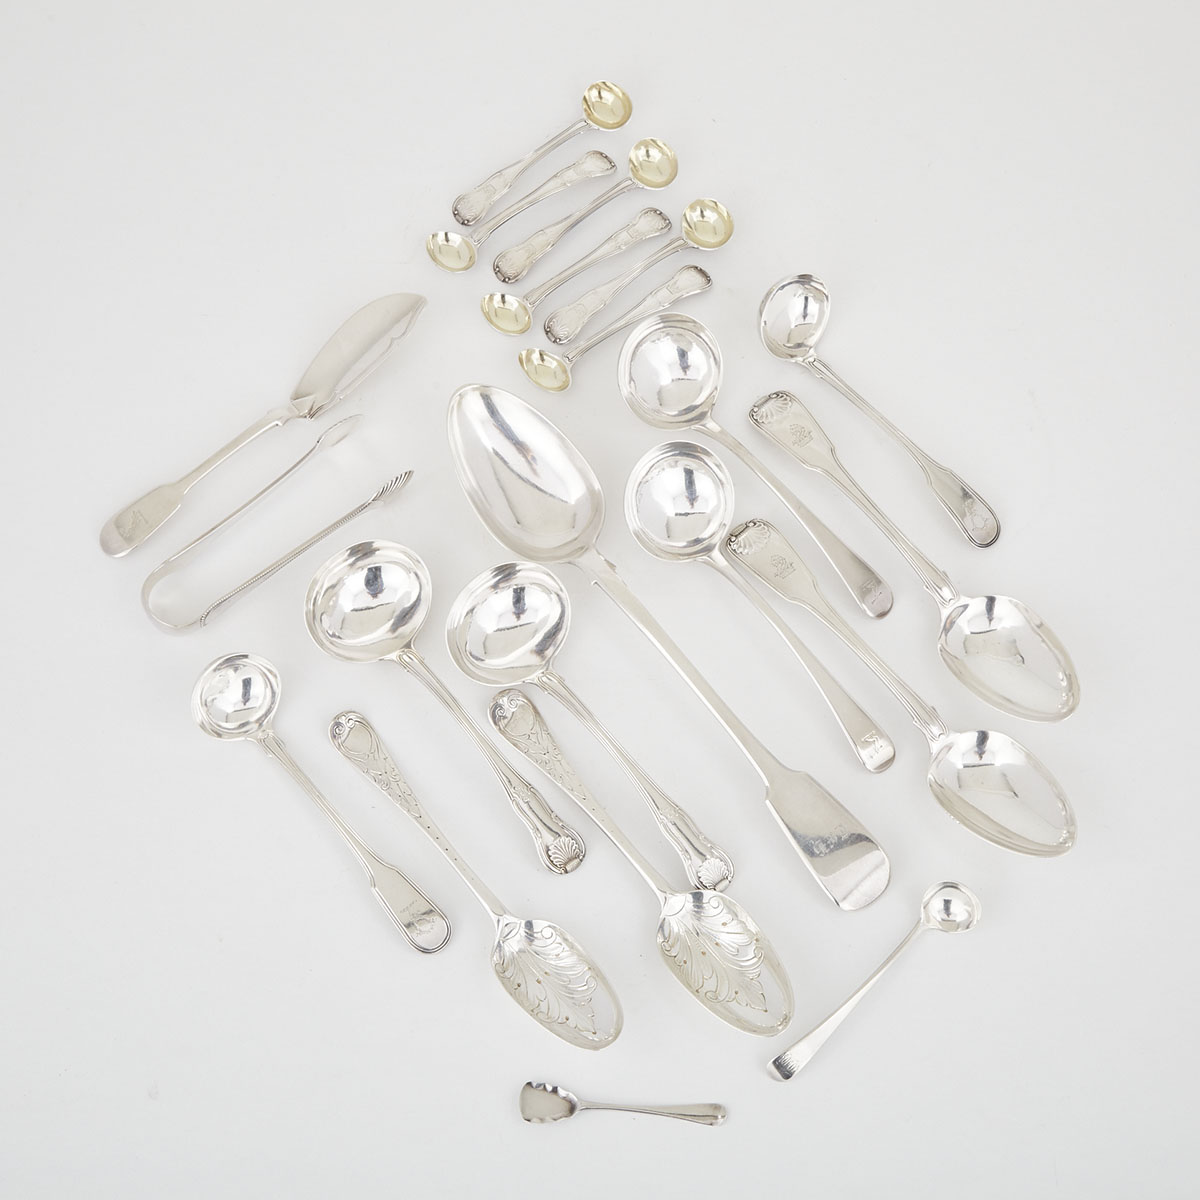 Group of George II and Later English and Scottish Silver Flatware, c.1749-1868